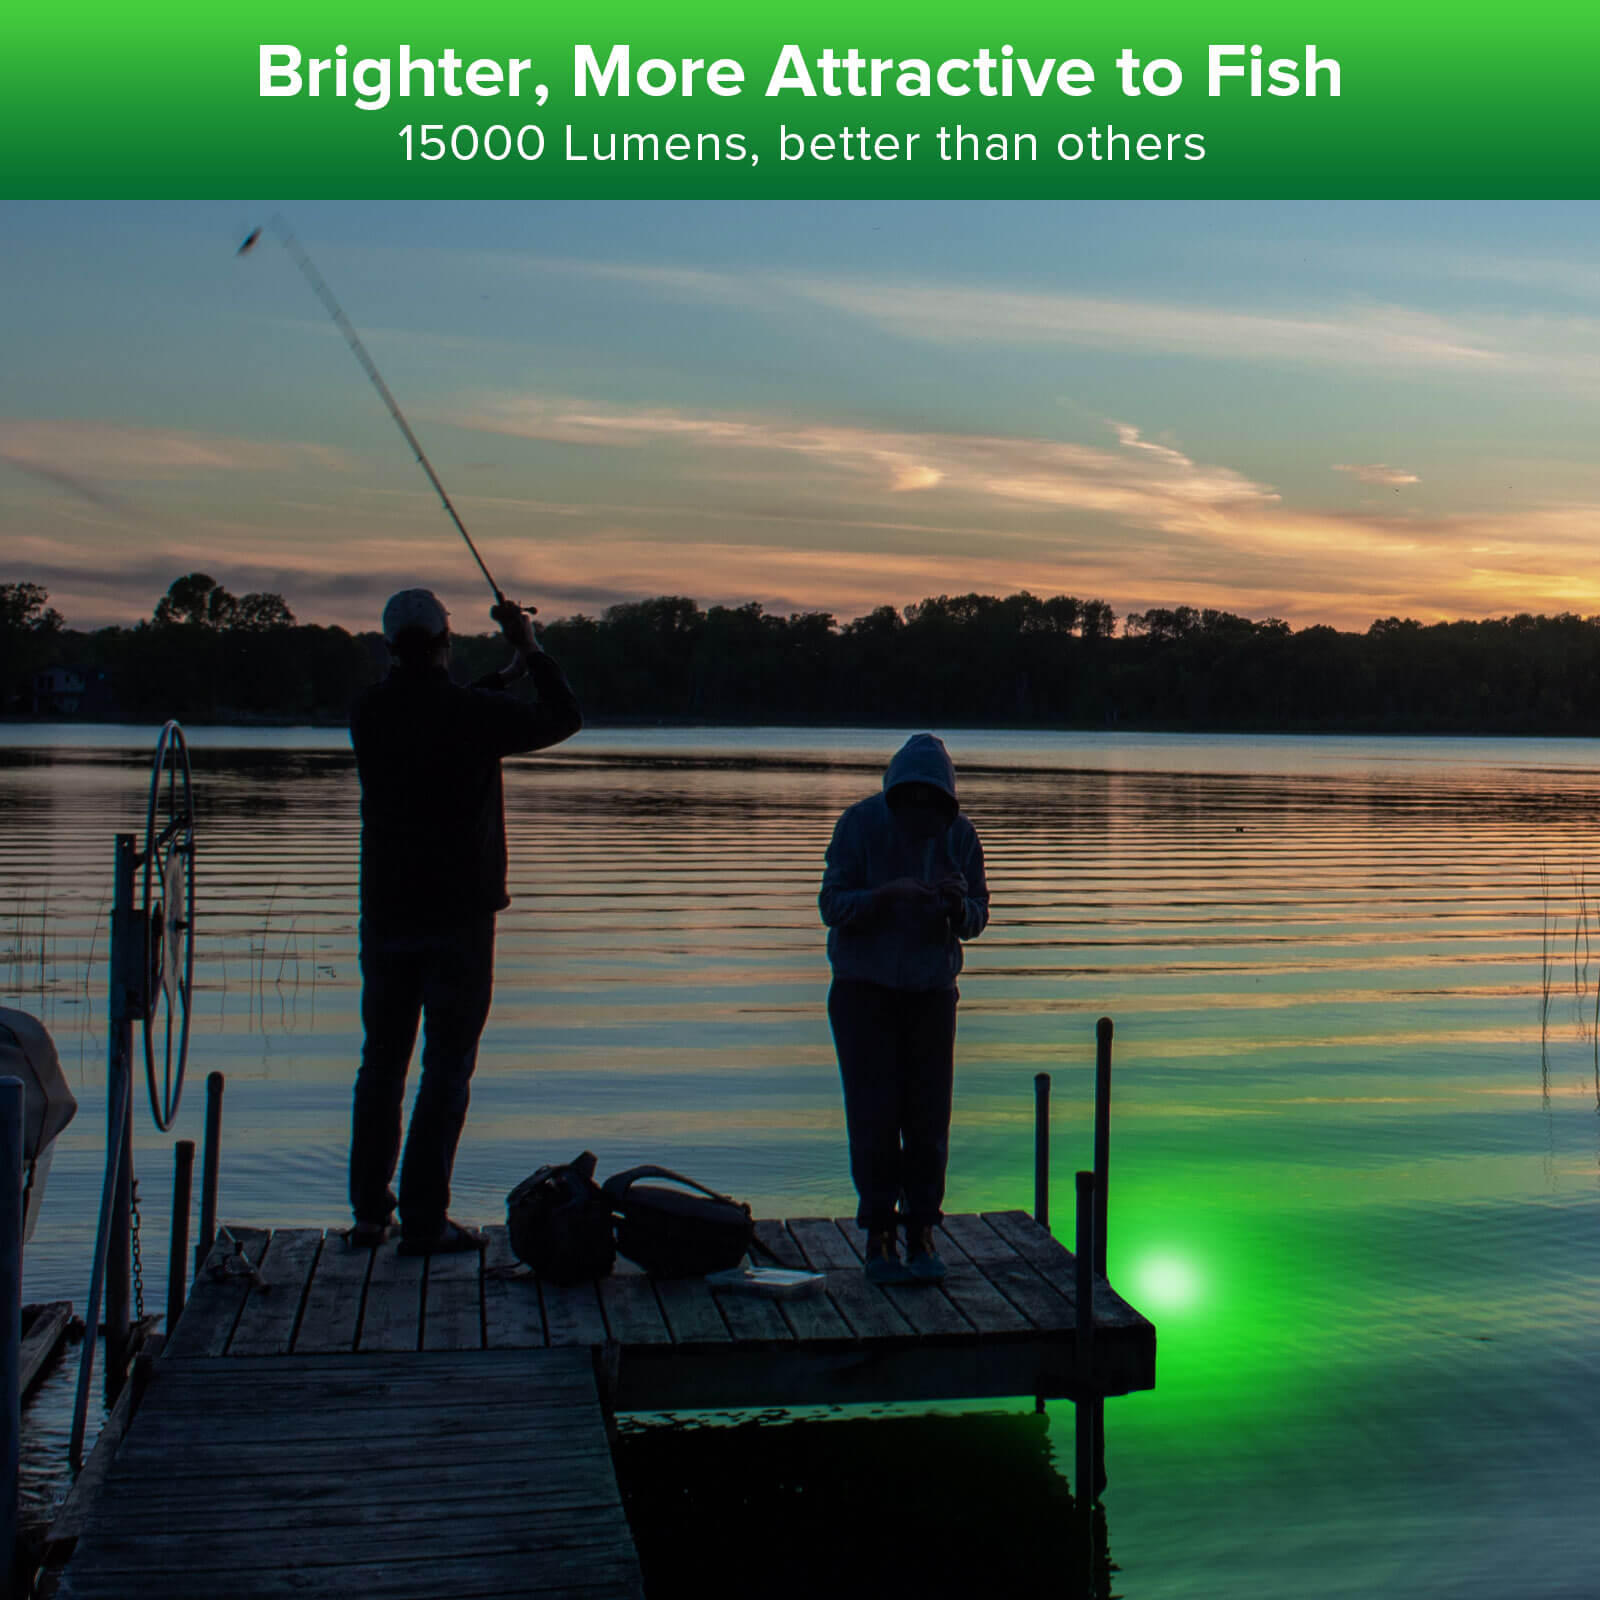 Underwater Fishing Light, Fish Attractor is 15000 lumens, better than others